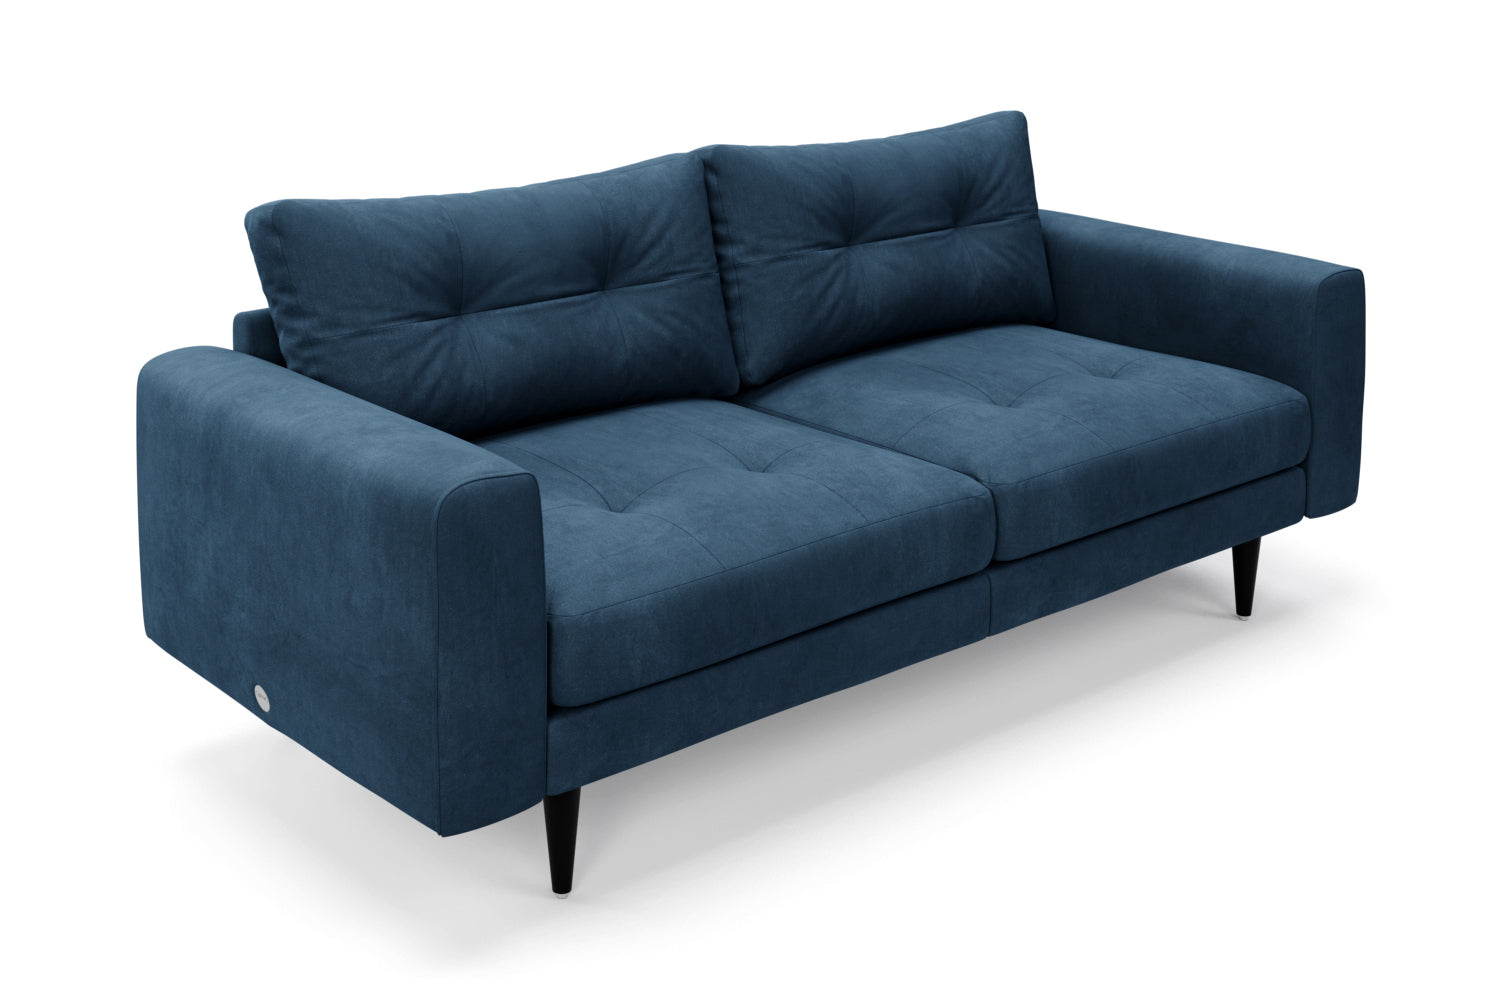 SNUG | The Big Chill 3 Seater Sofa Blind Button Back and Seat Cushions in Blue Steel